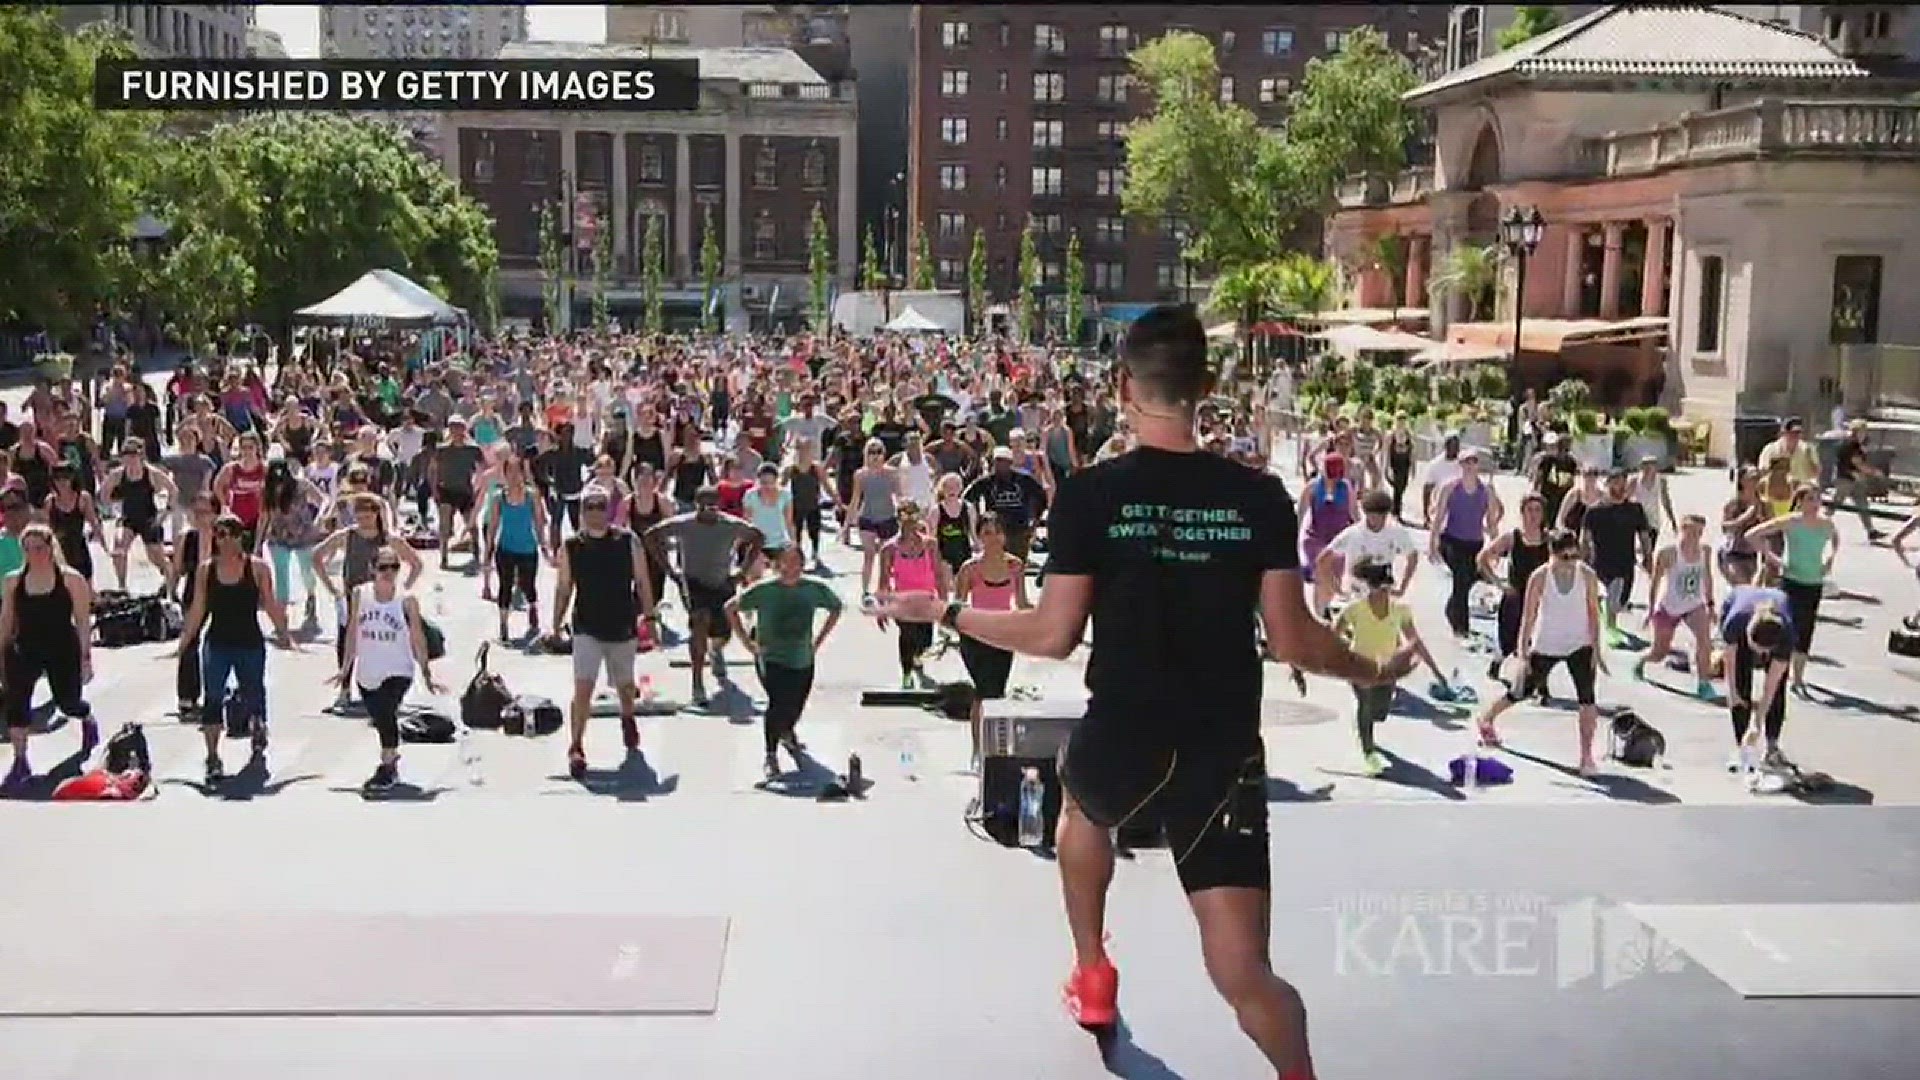 Fitbit to host free yoga at Target Field